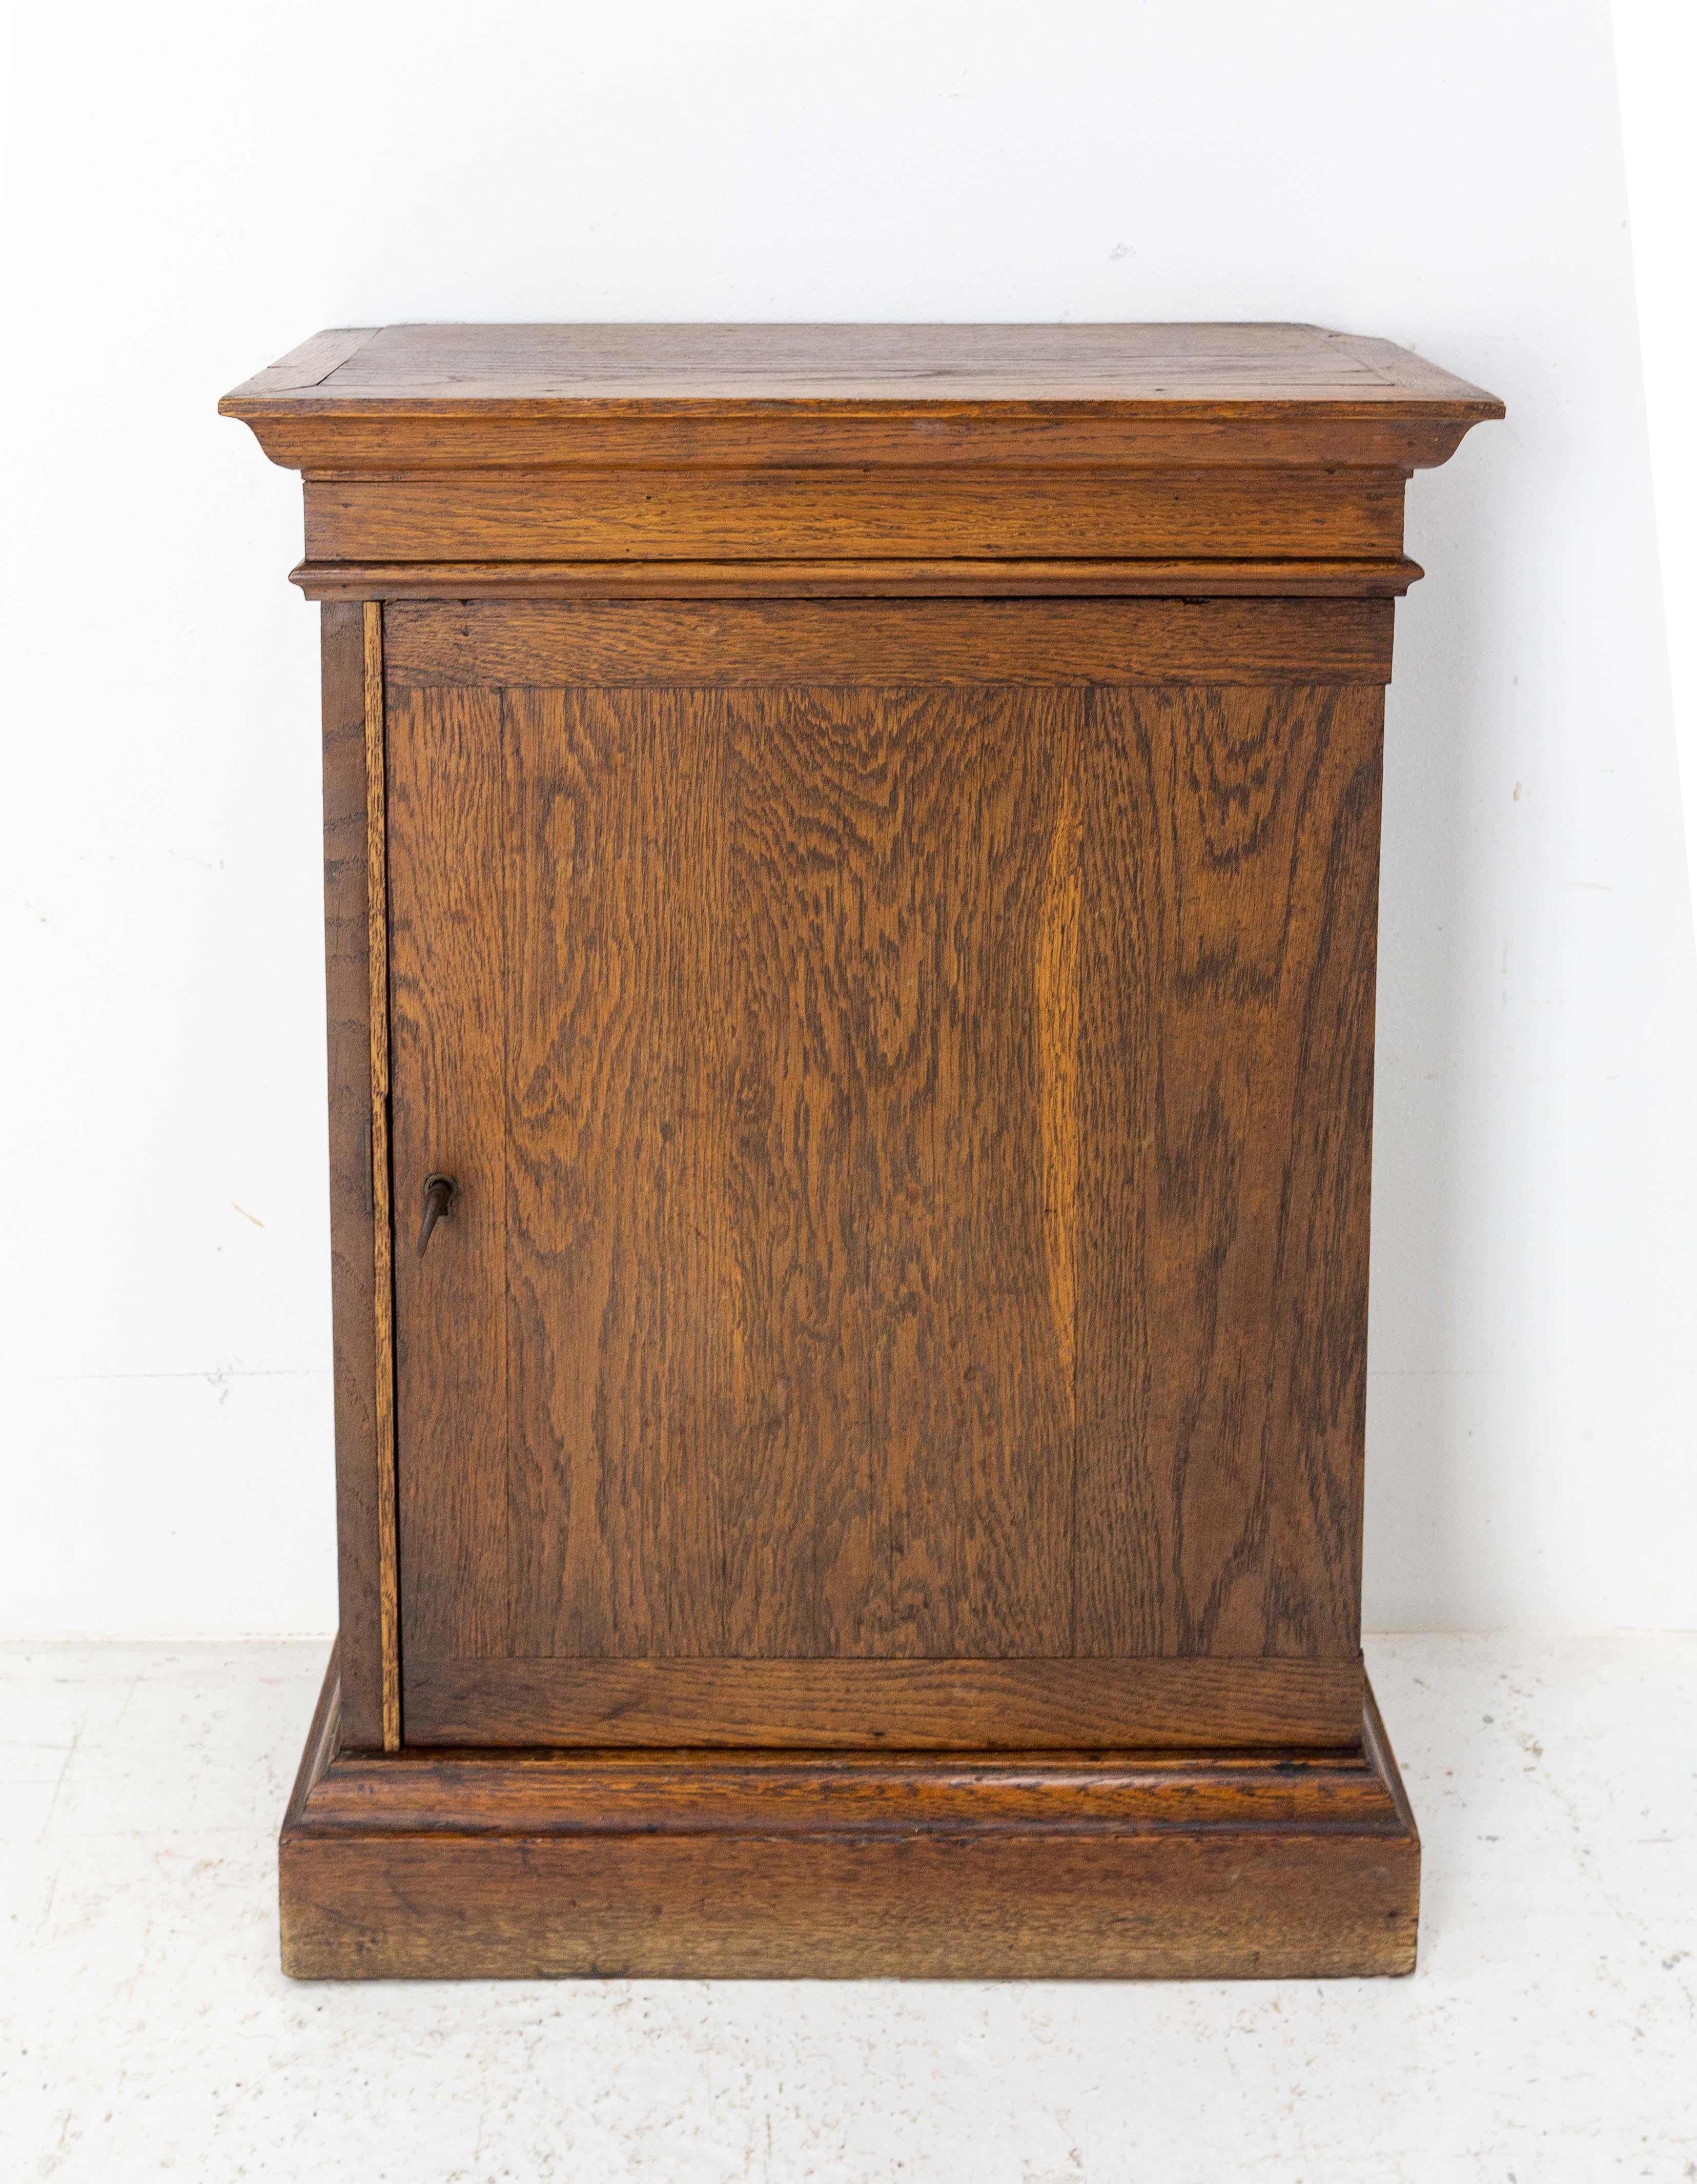 Early 20th century French cabinet buffet
Oak wood
Reduced depth furniture ideal for small spaces
In good condition 

Shipping:
L45,5 P19,50 H62 8,7Kg.